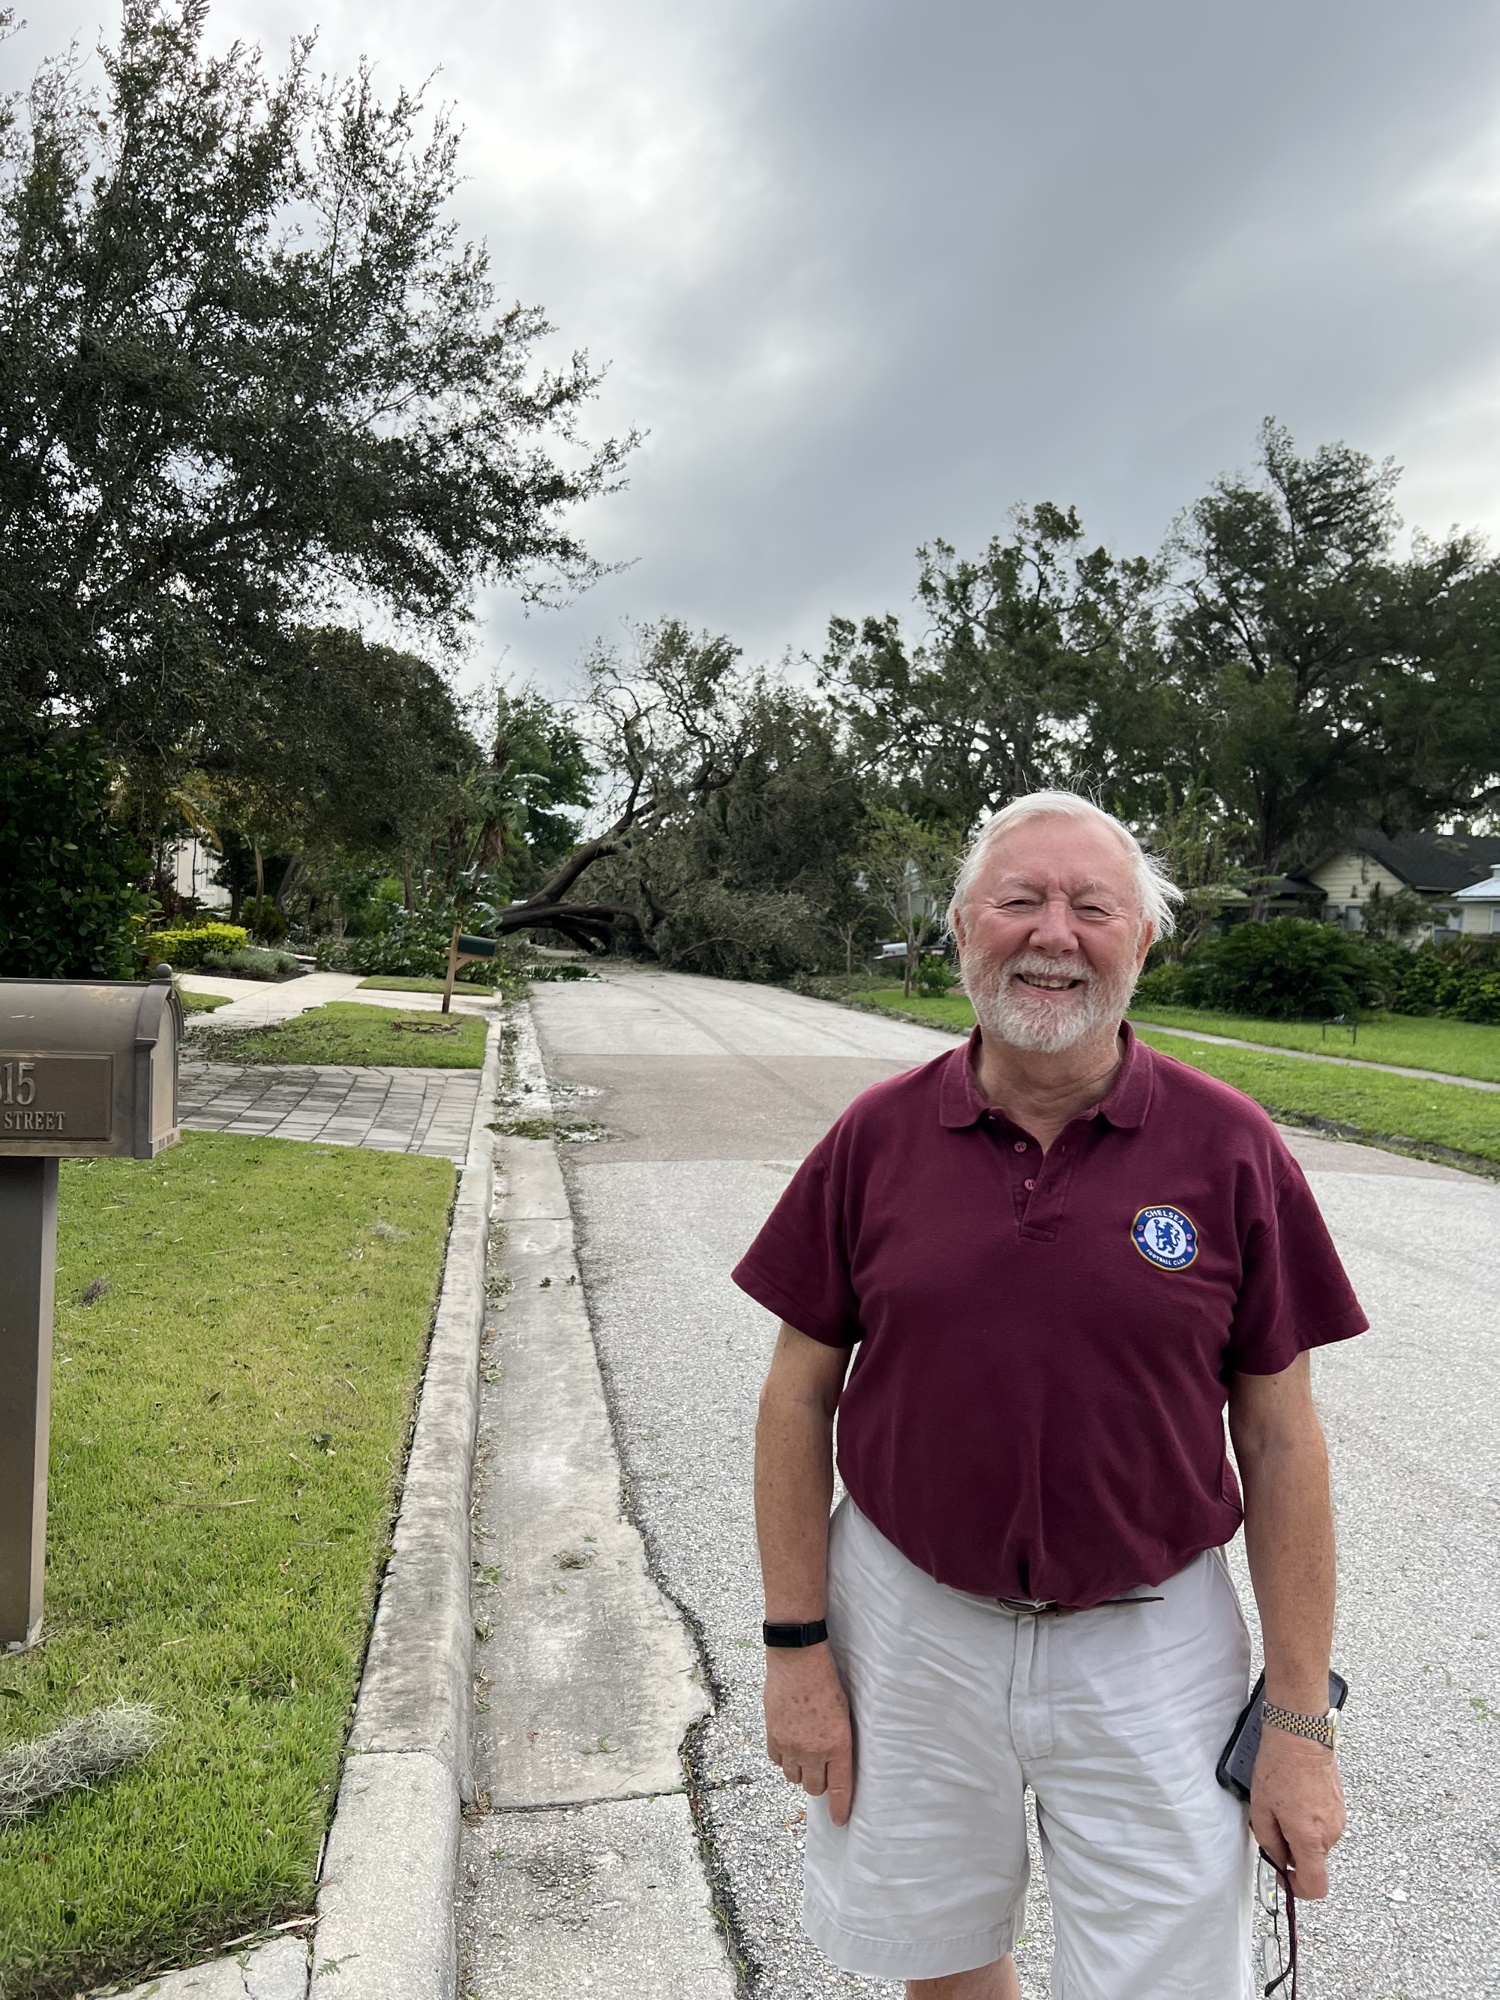 Anthony Layzell moved to Florida from California 11 weeks ago. When it comes to natural disasters, he said, 